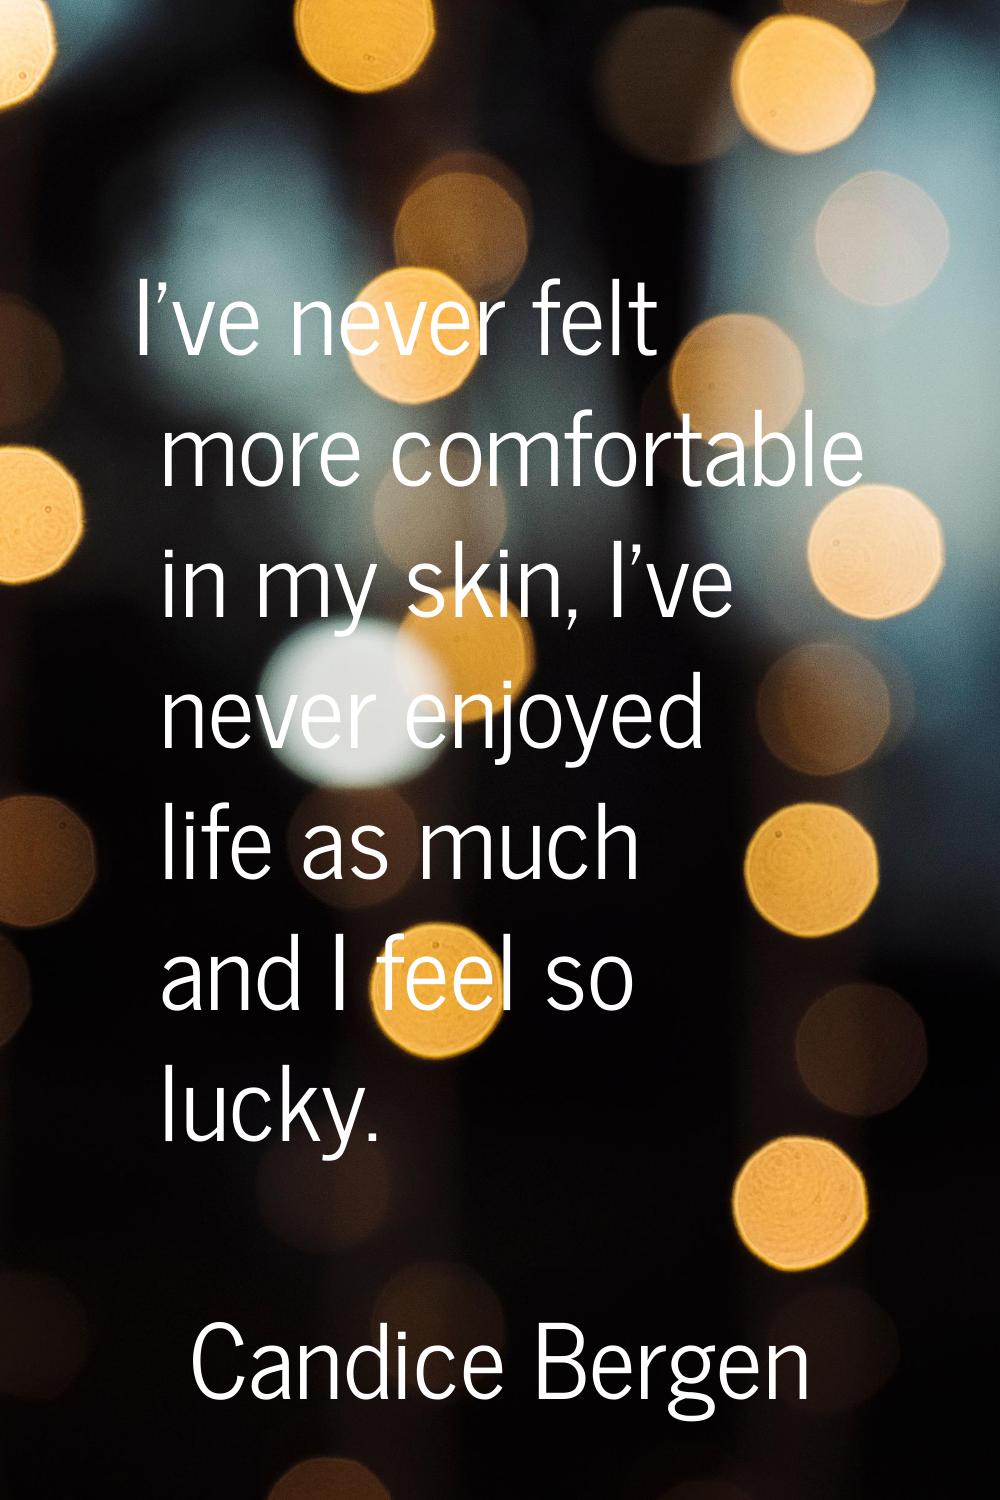 I've never felt more comfortable in my skin, I've never enjoyed life as much and I feel so lucky.